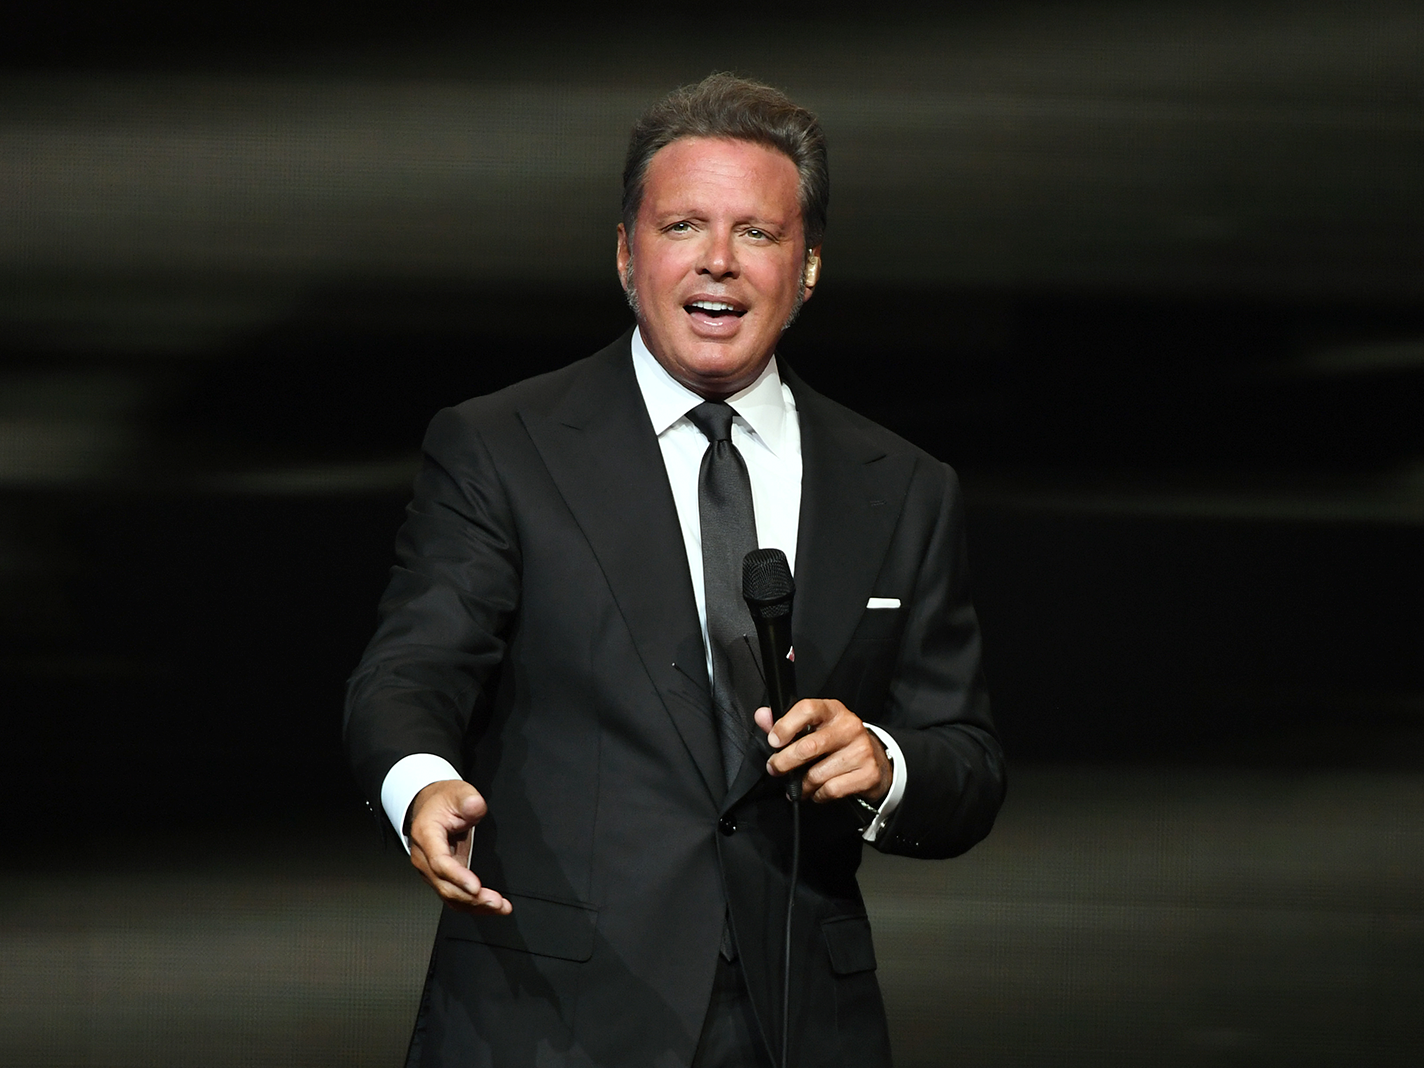 Luis Miguel Is the First Mexican Artist To Hit 5 Billion Downloads on